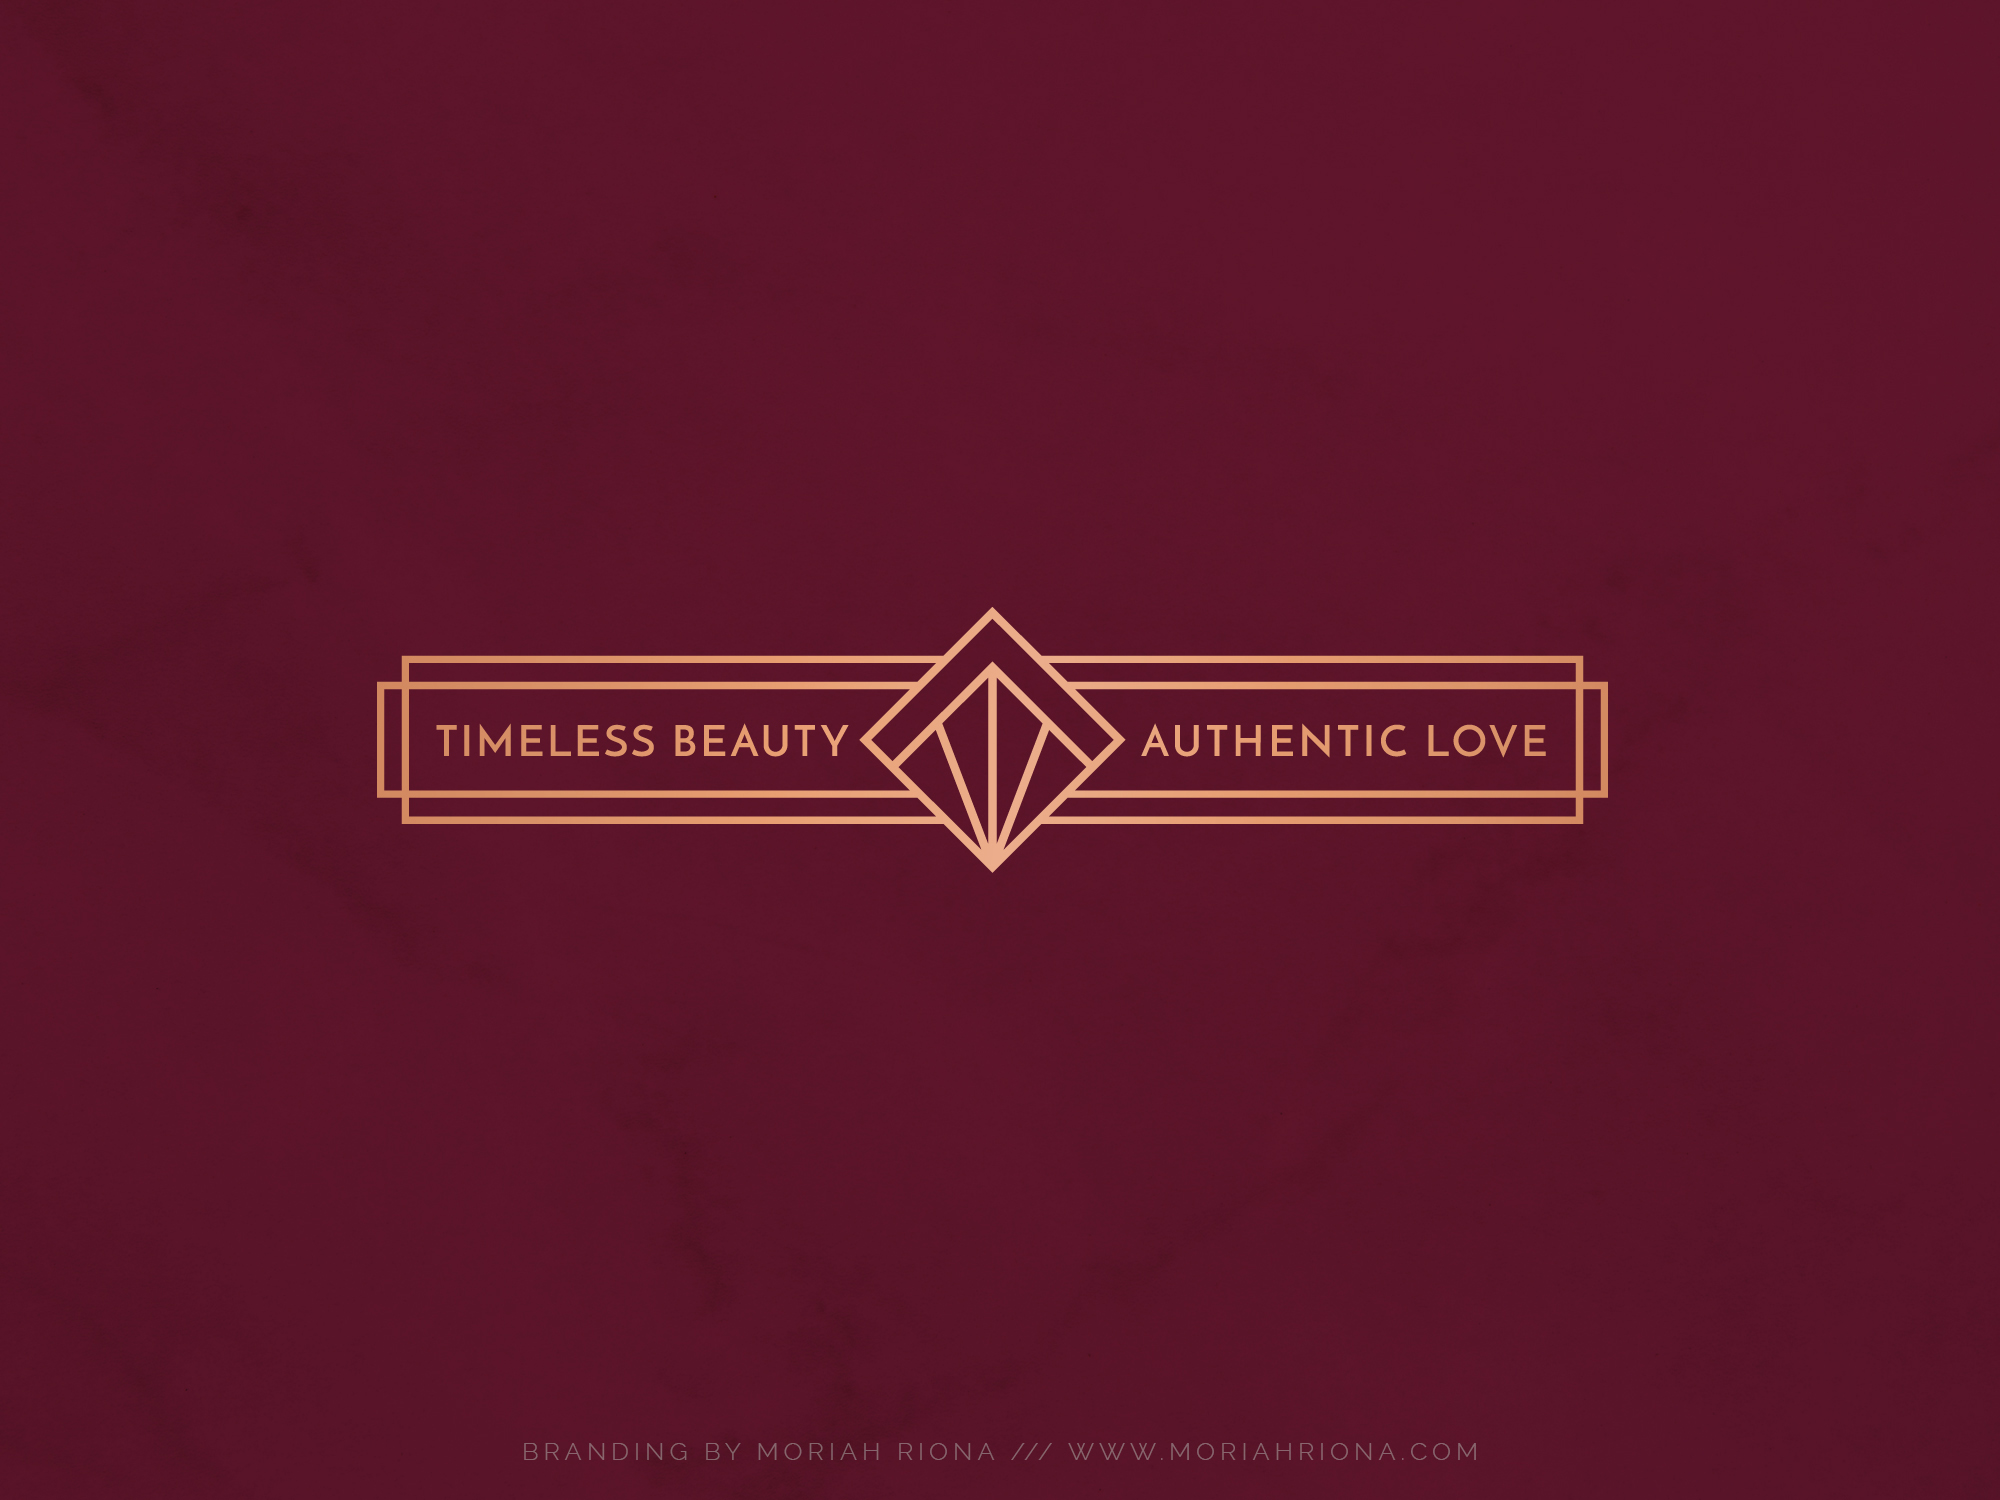 Tagline Design by Moriah Riona for Wedding Photographer, Stefani Ciotti. Art Deco inspired with a burgundy and copper color palette. Graphic Design and Branding for photographers and creative bossladies.